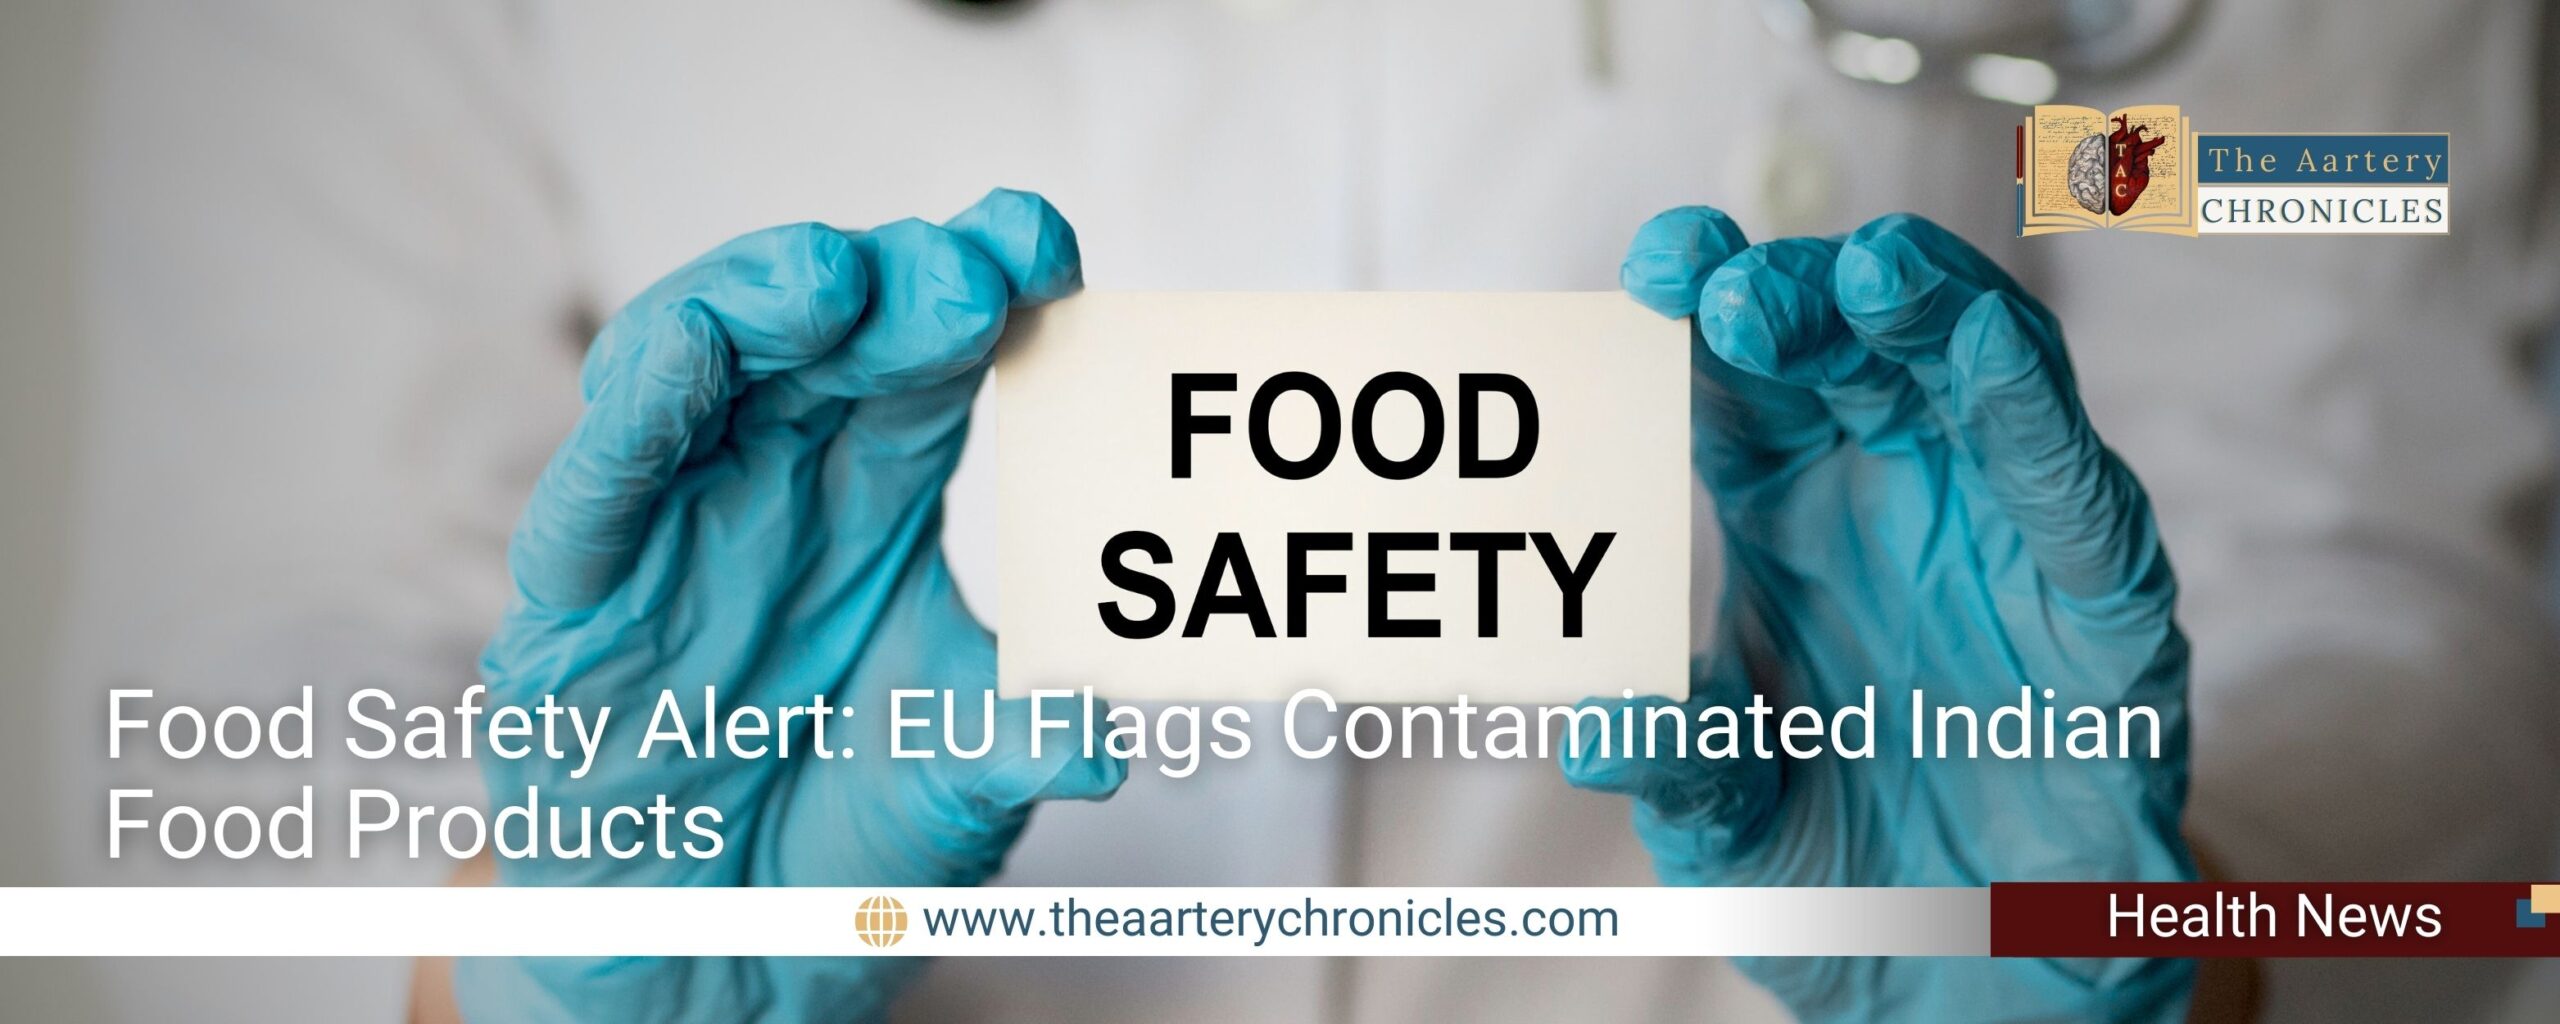 food-safety-alert-the-aartery-chronicles-tac